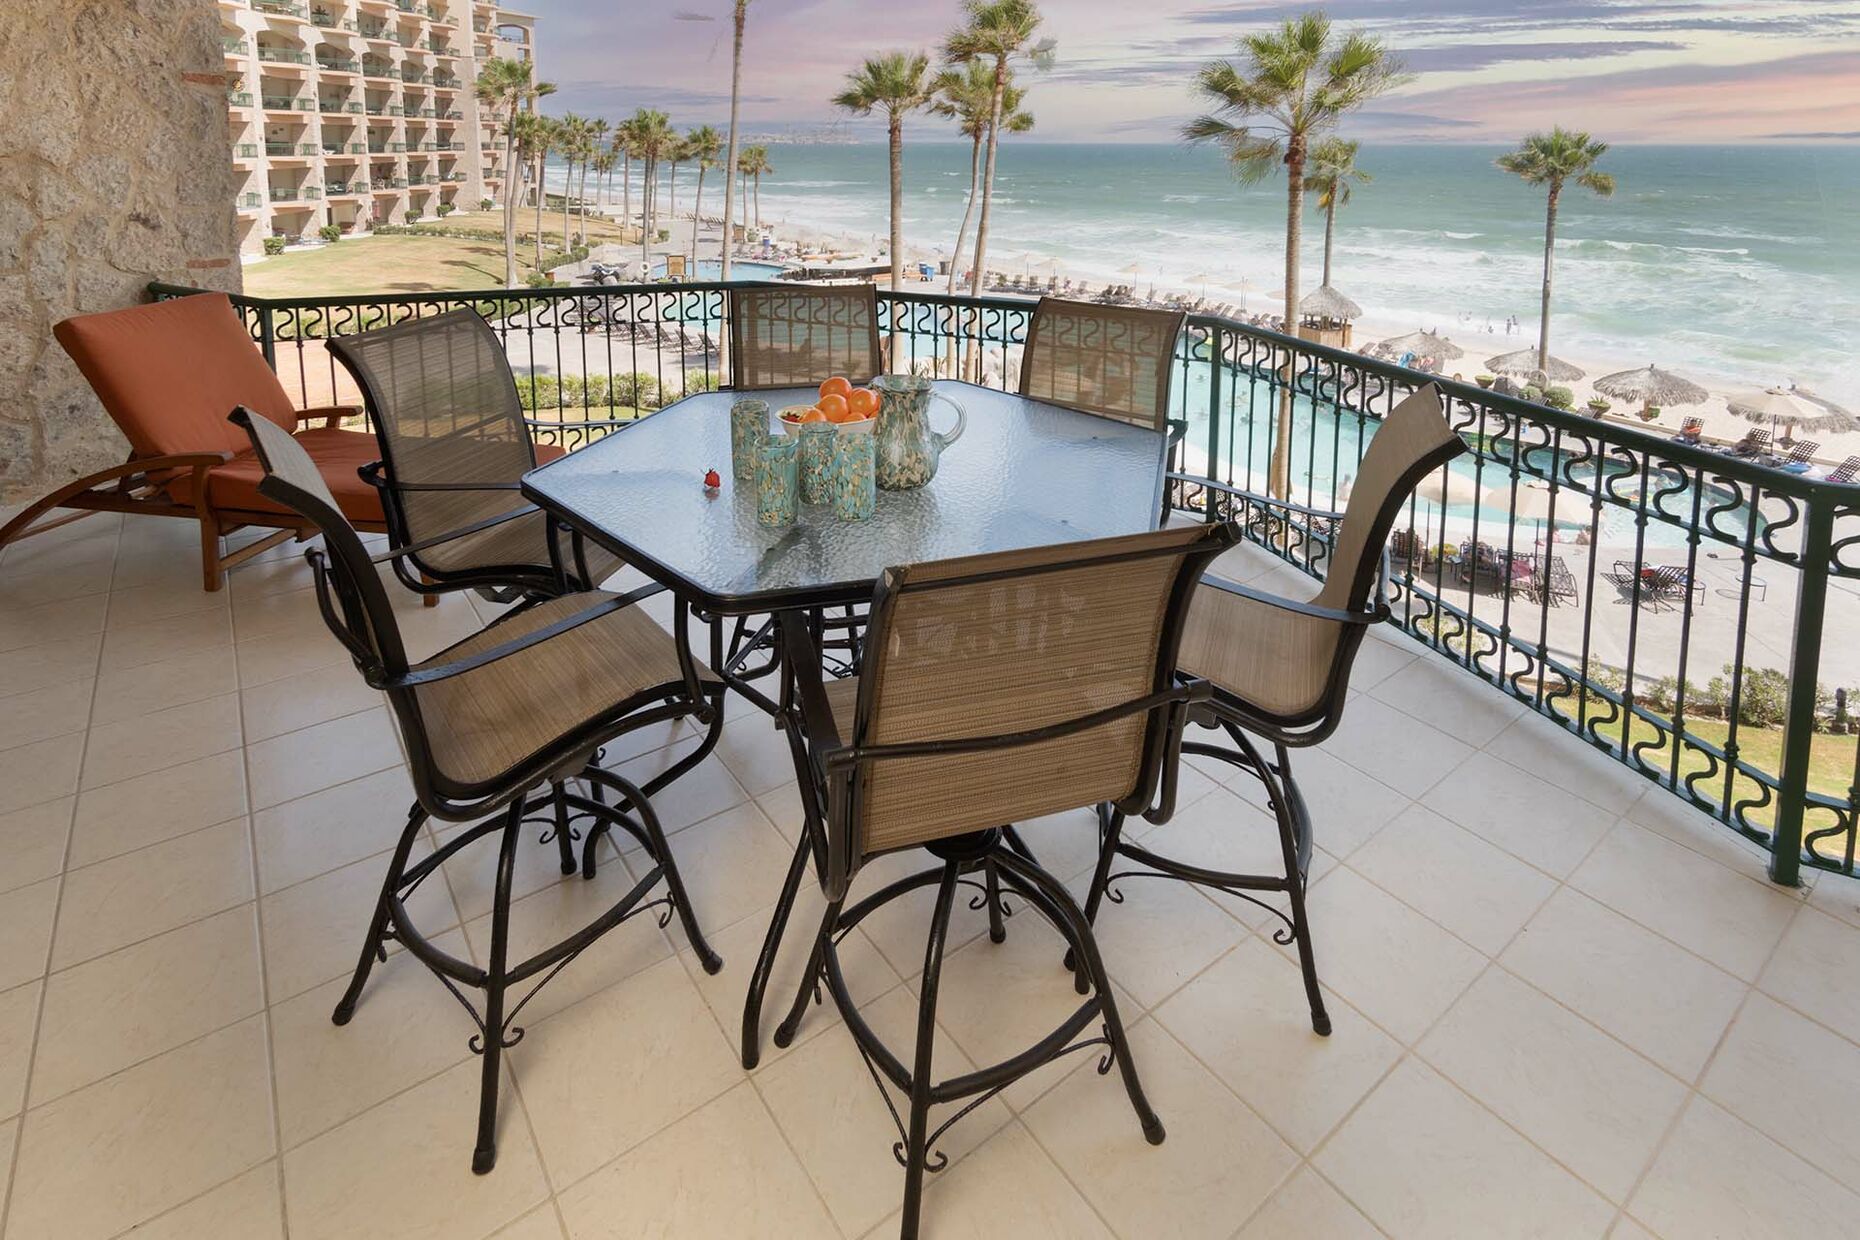 You and your family will have enviable views from your patio.